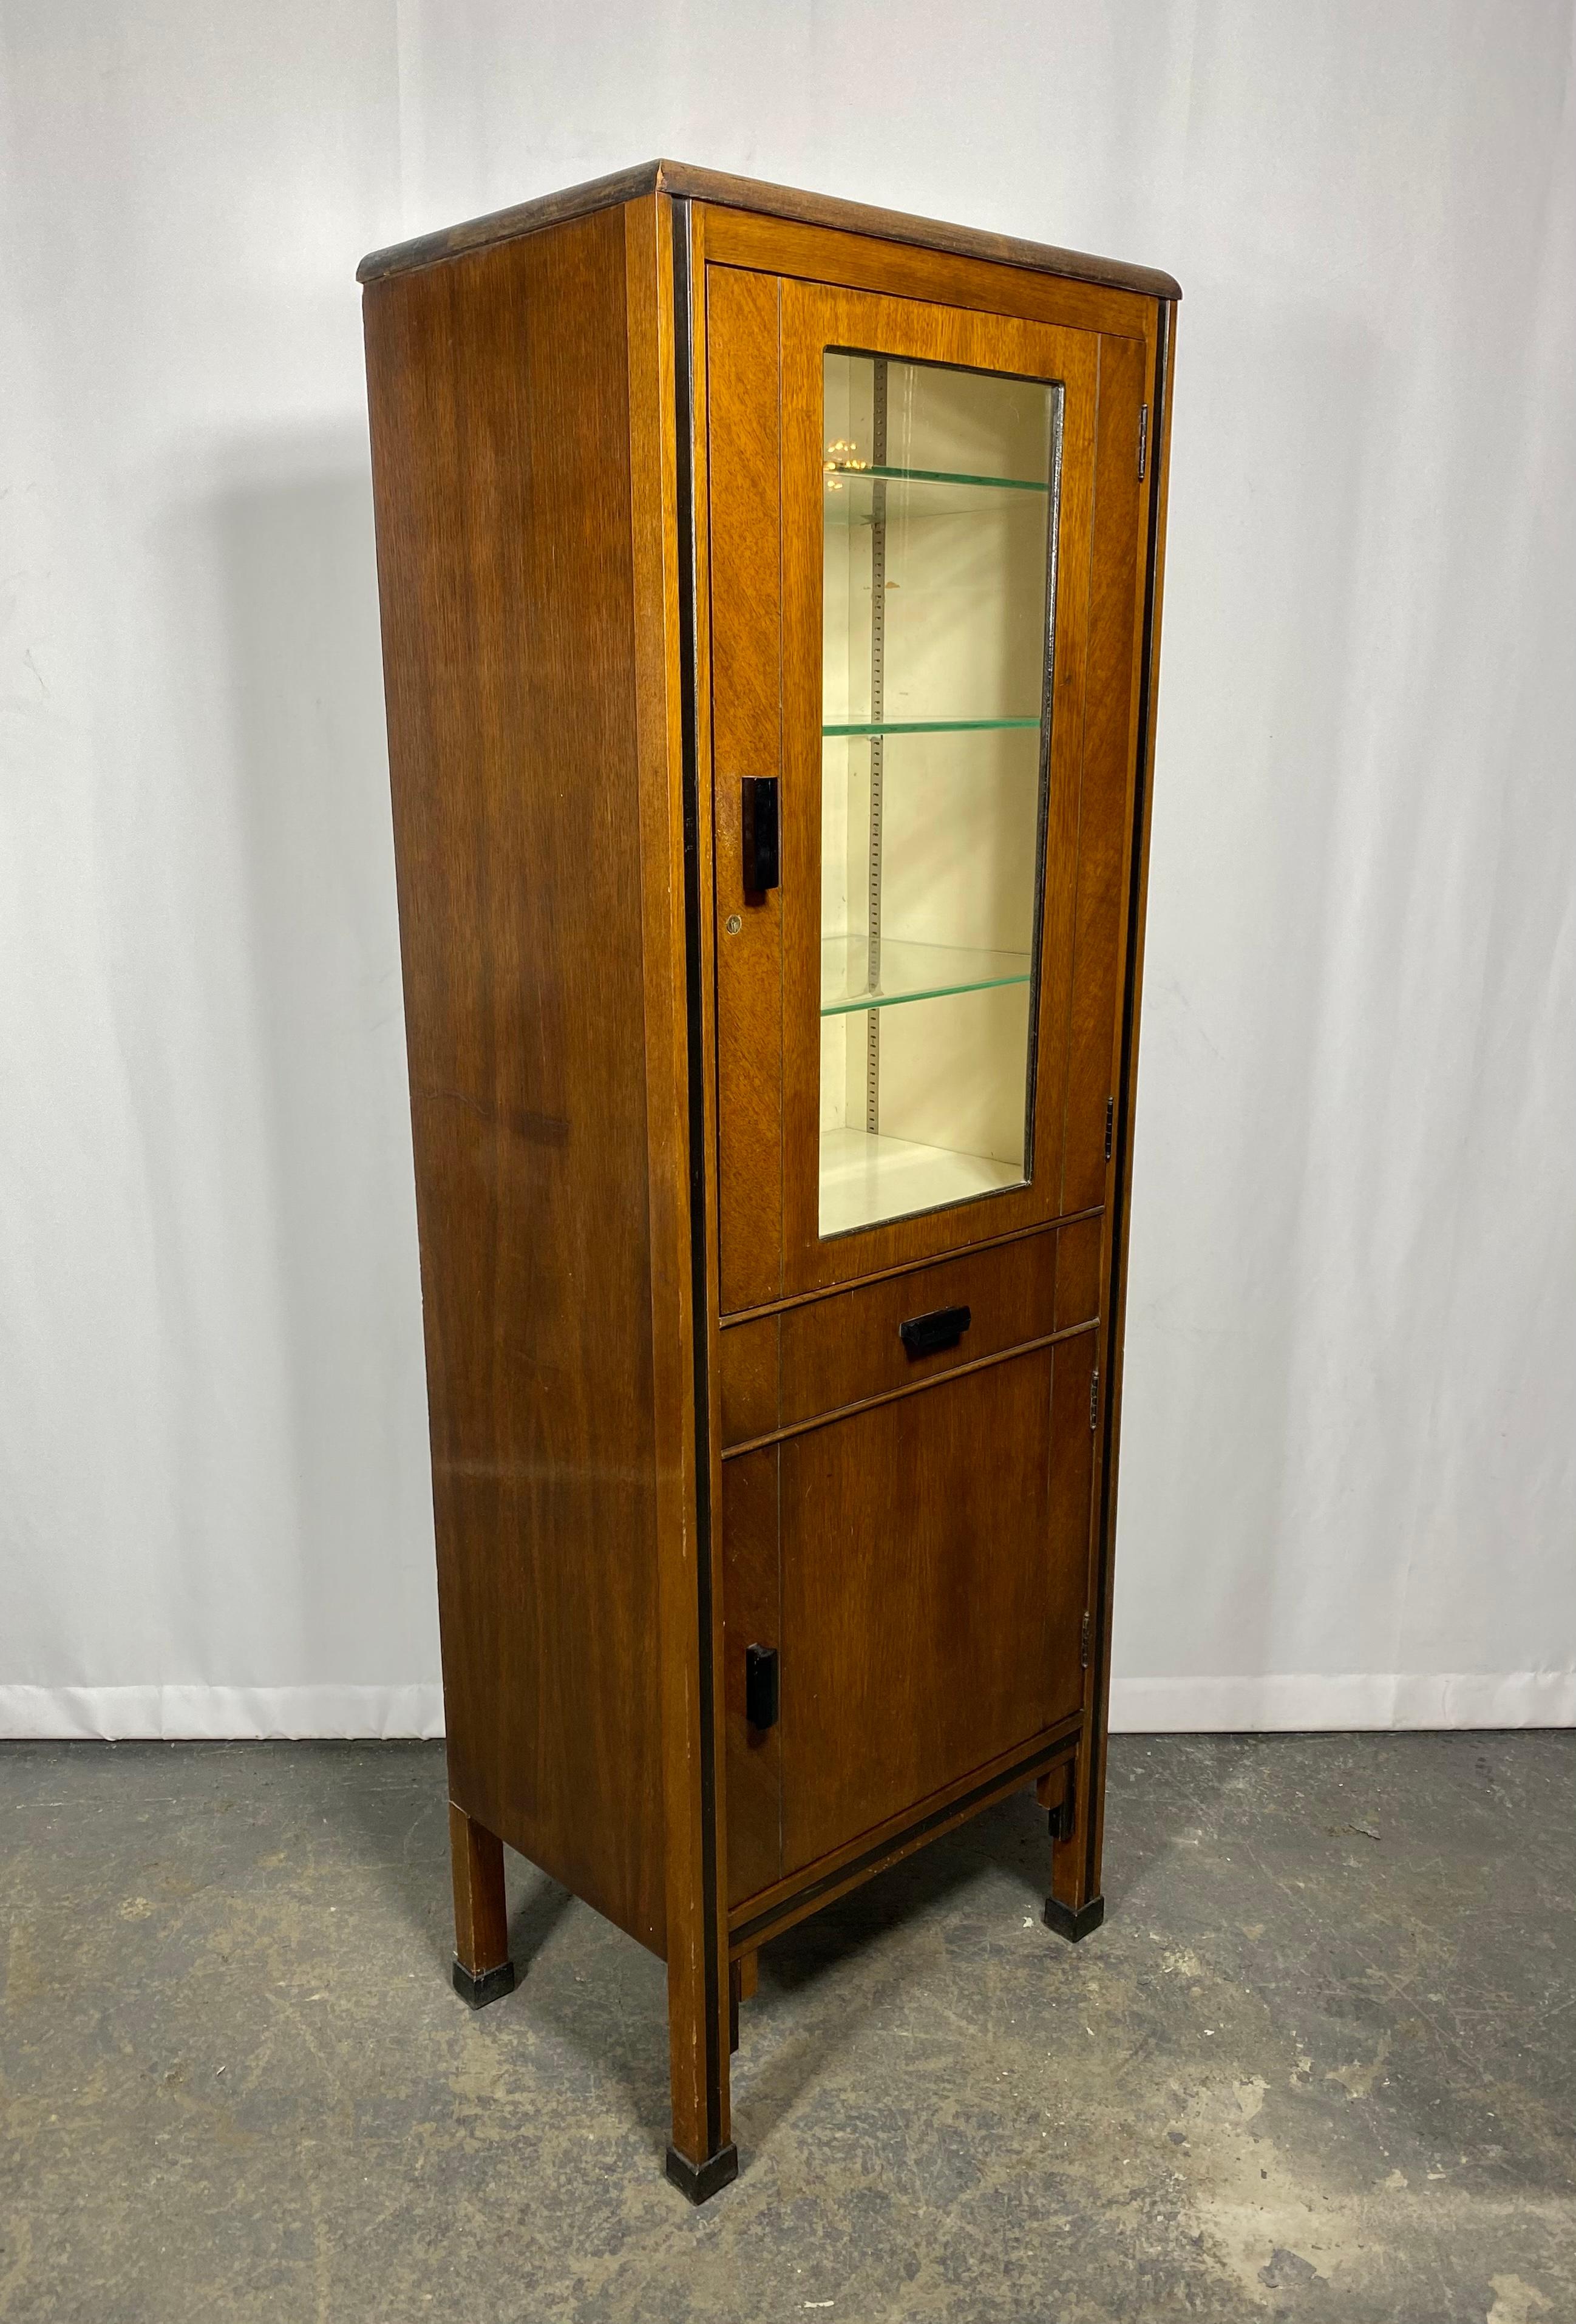 Elegant Art Deco Dental cabinet, walnut and glass, manufactured by ENOCHS For Sale 2